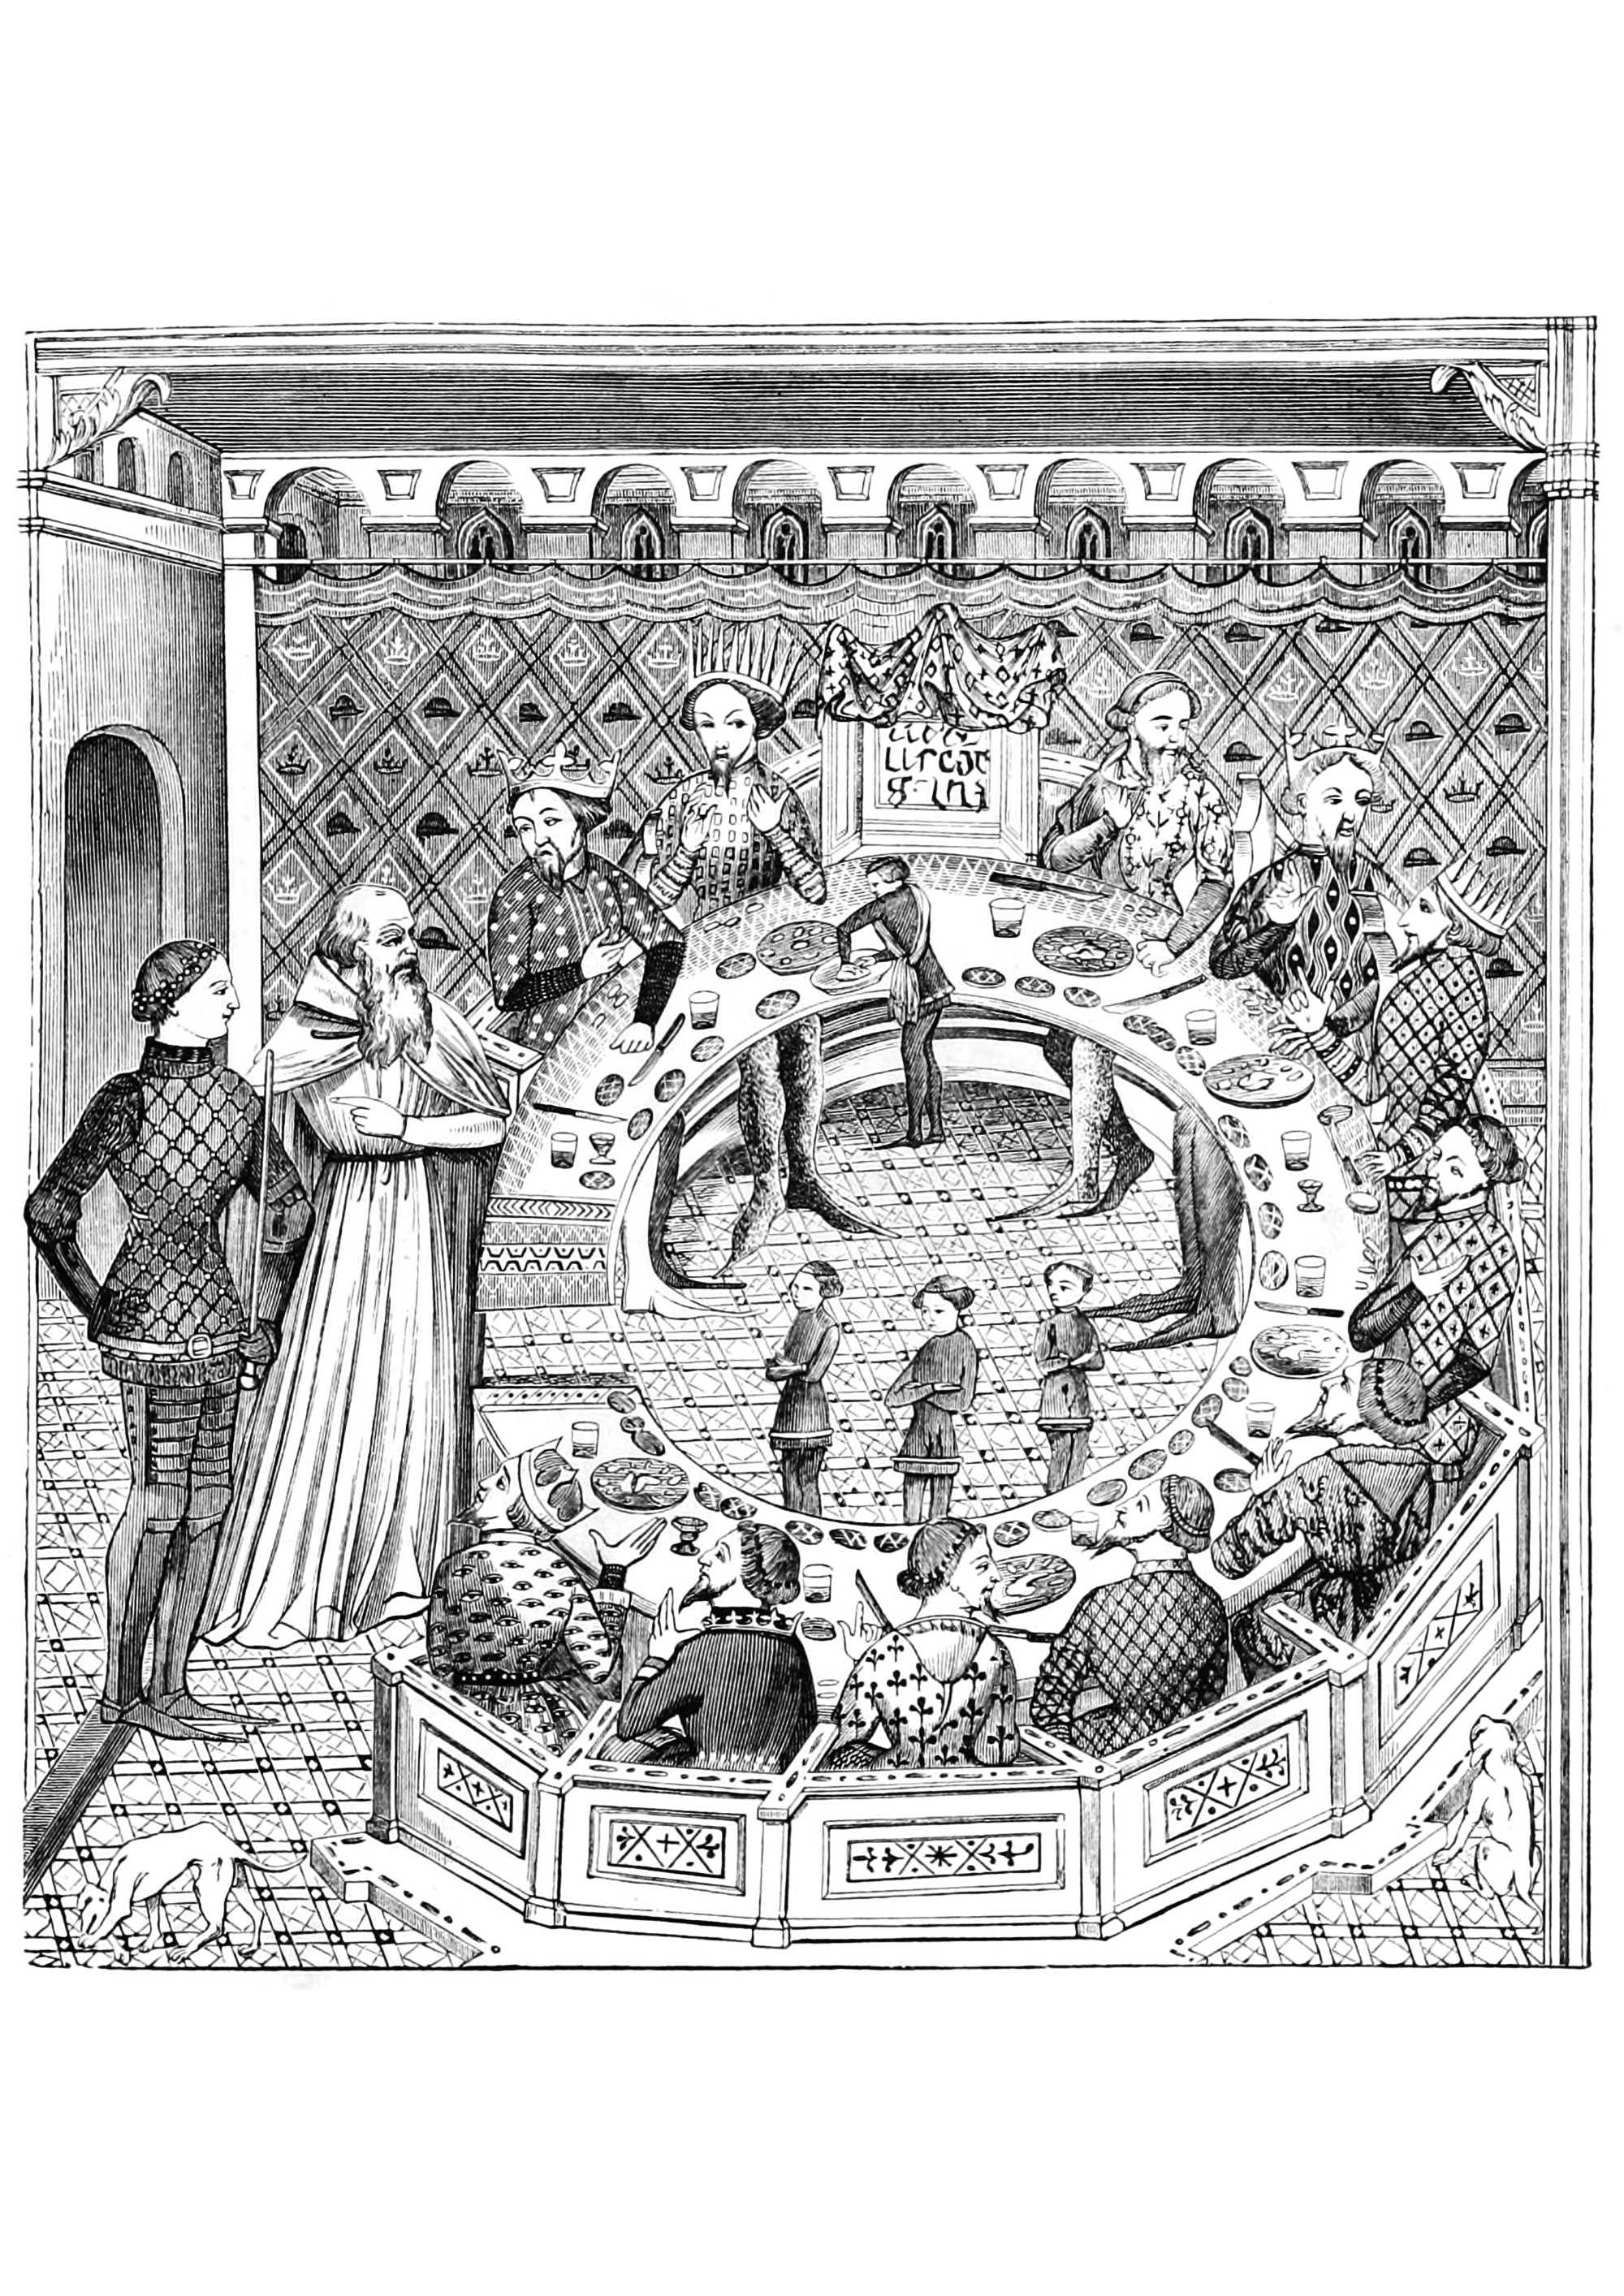 The Knights of the Round Table, with King Arthur. This 1873 illustration is based on a 14th-century engraving.The Knights of the Round Table are a legendary order in the service of King Arthur, charged by him with leading the quest for the Grail and ensuring the peace of the kingdom. The first written trace of the Knights of the Round Table legend can be found in the Roman de Brut, written by the Norman poet Wace in 1155.